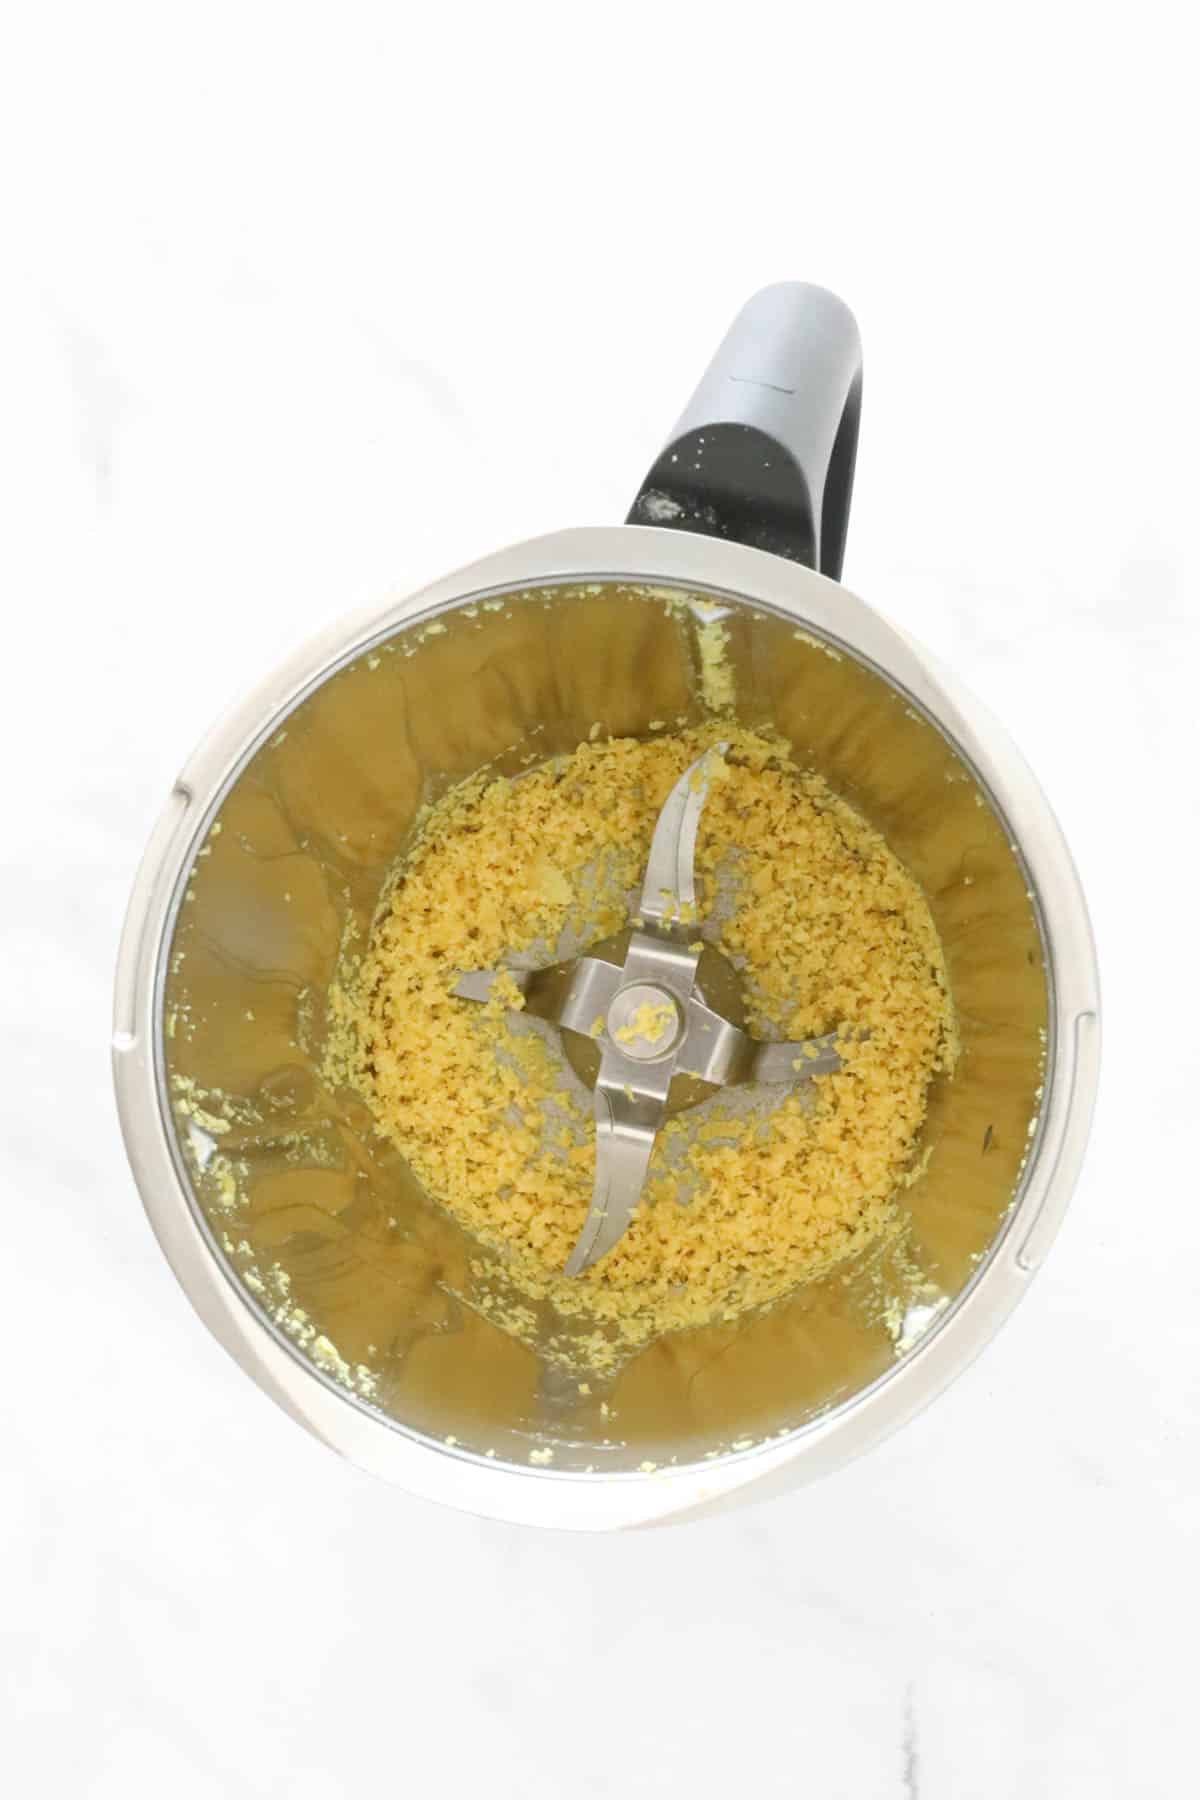 Grated lemon zest in a Thermomix.